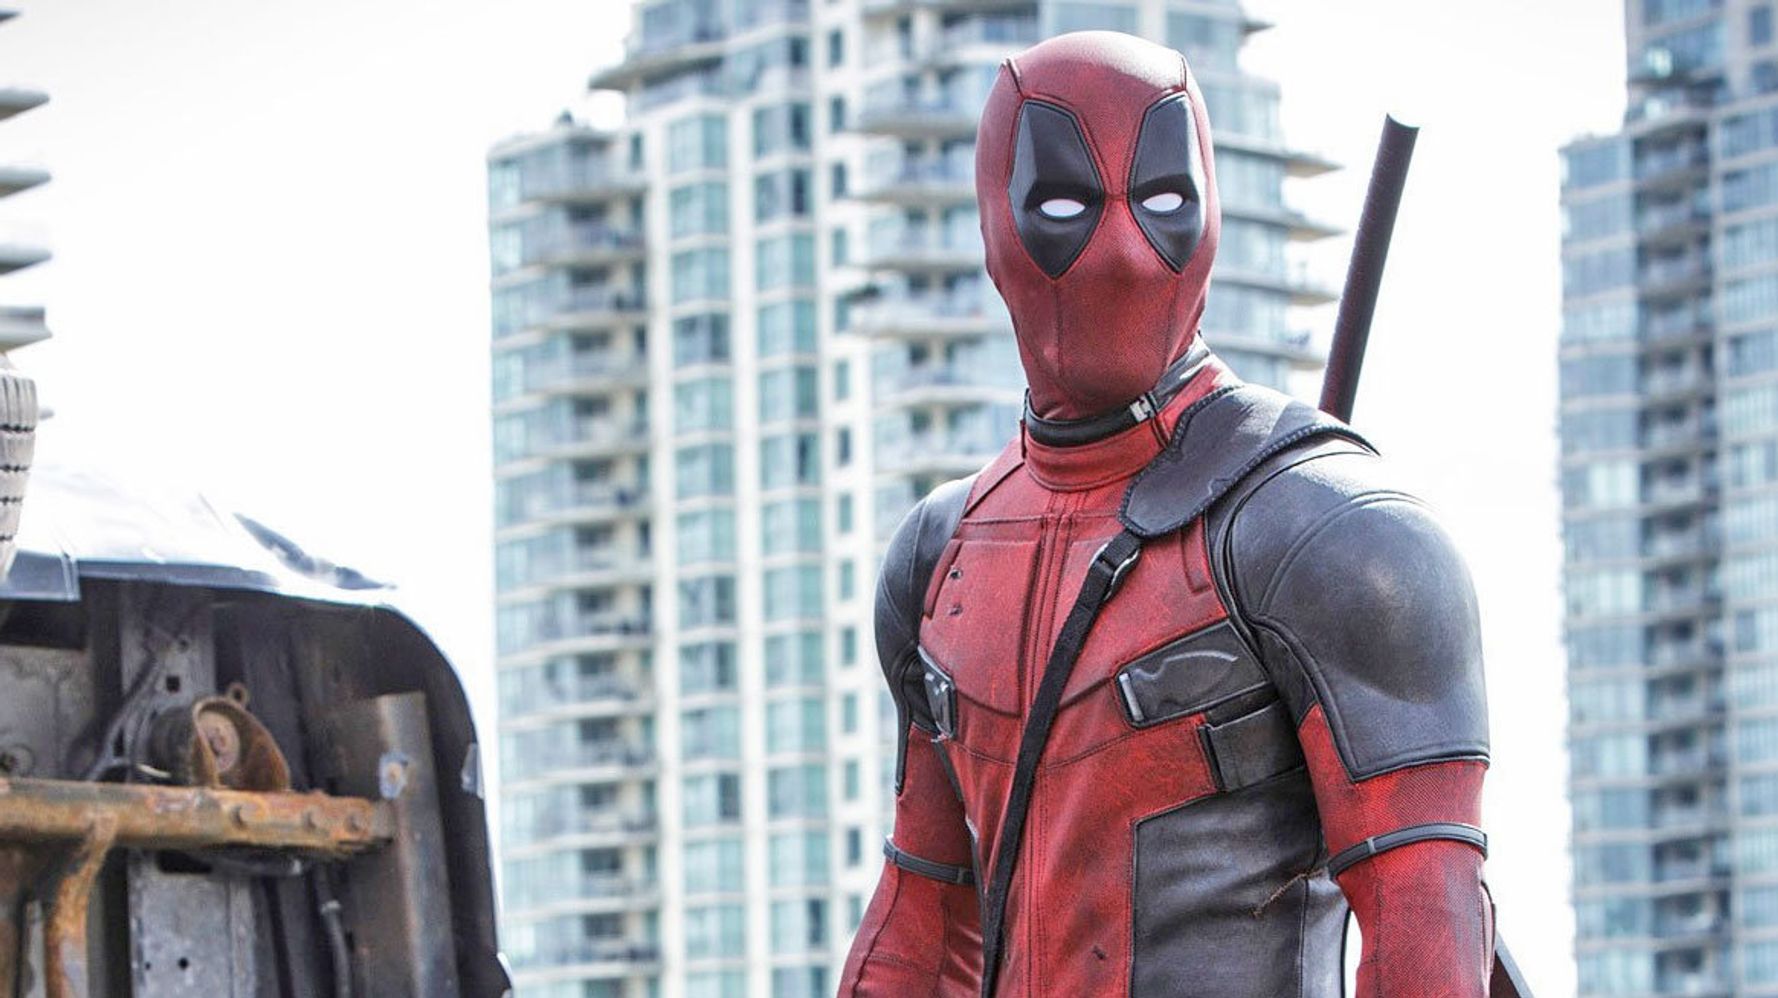 Deadpool 2' ends Avengers' box office reign with $125 Million